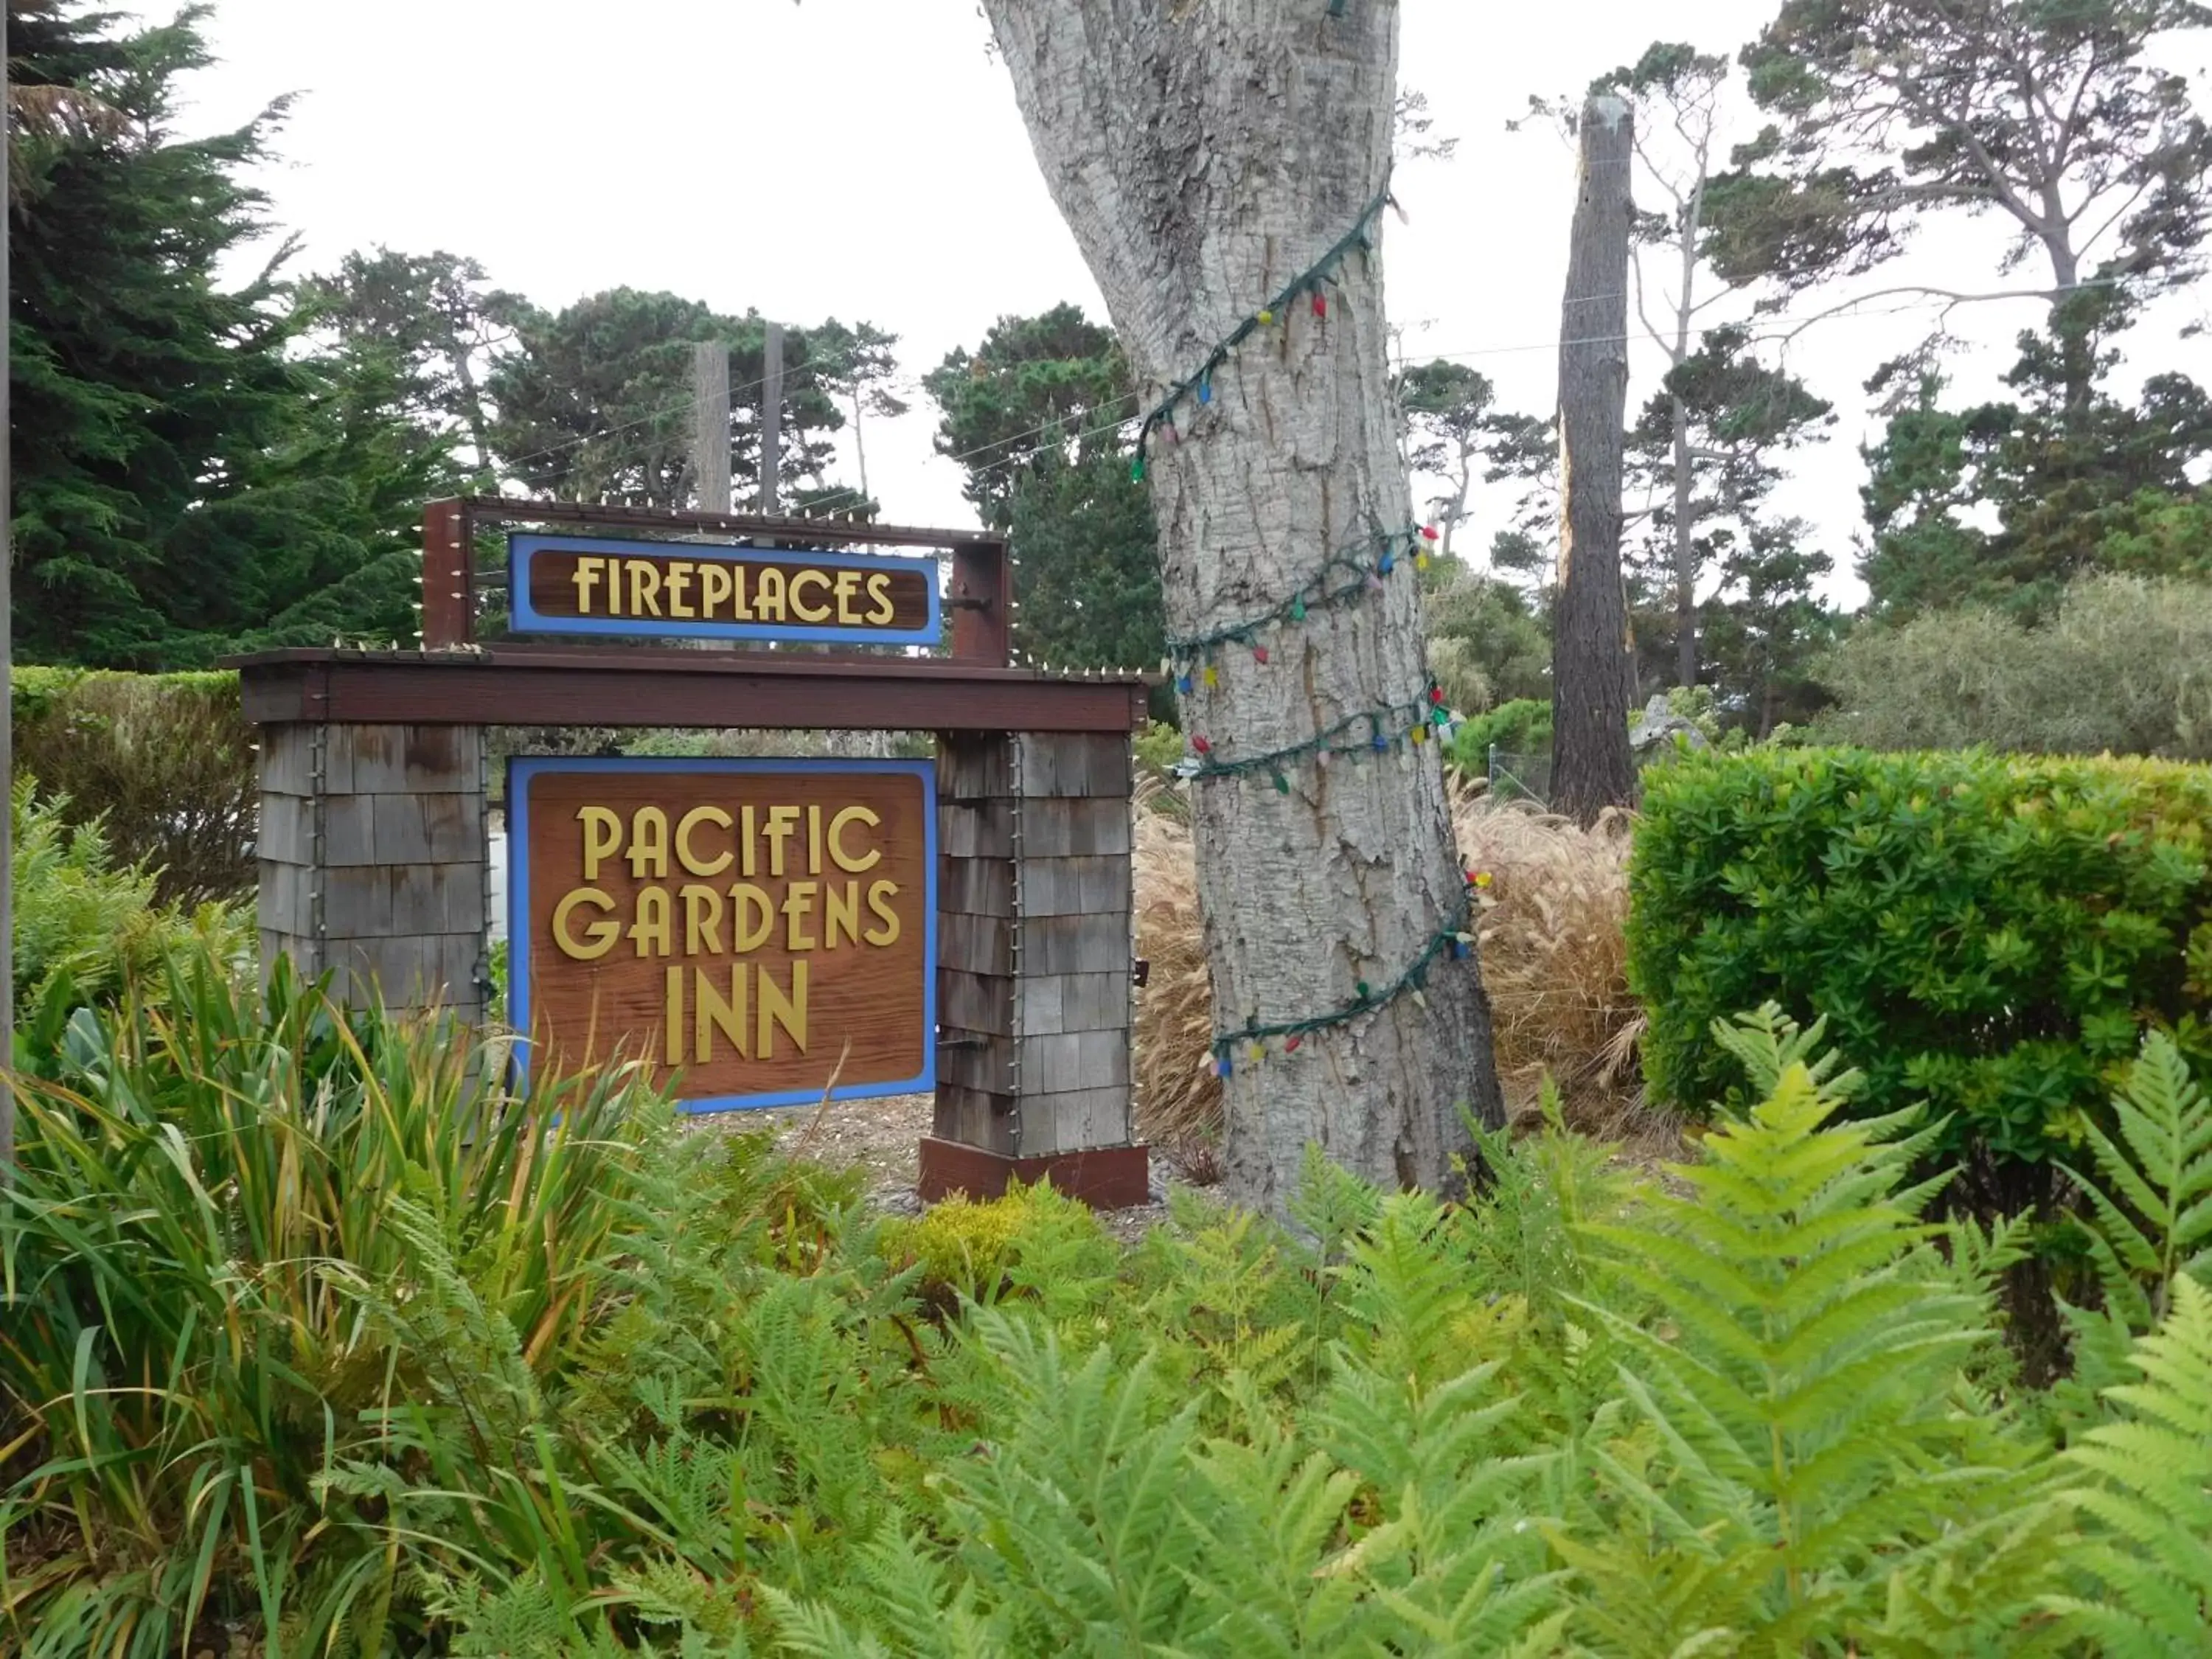 Property logo or sign, Property Building in Pacific Gardens Inn